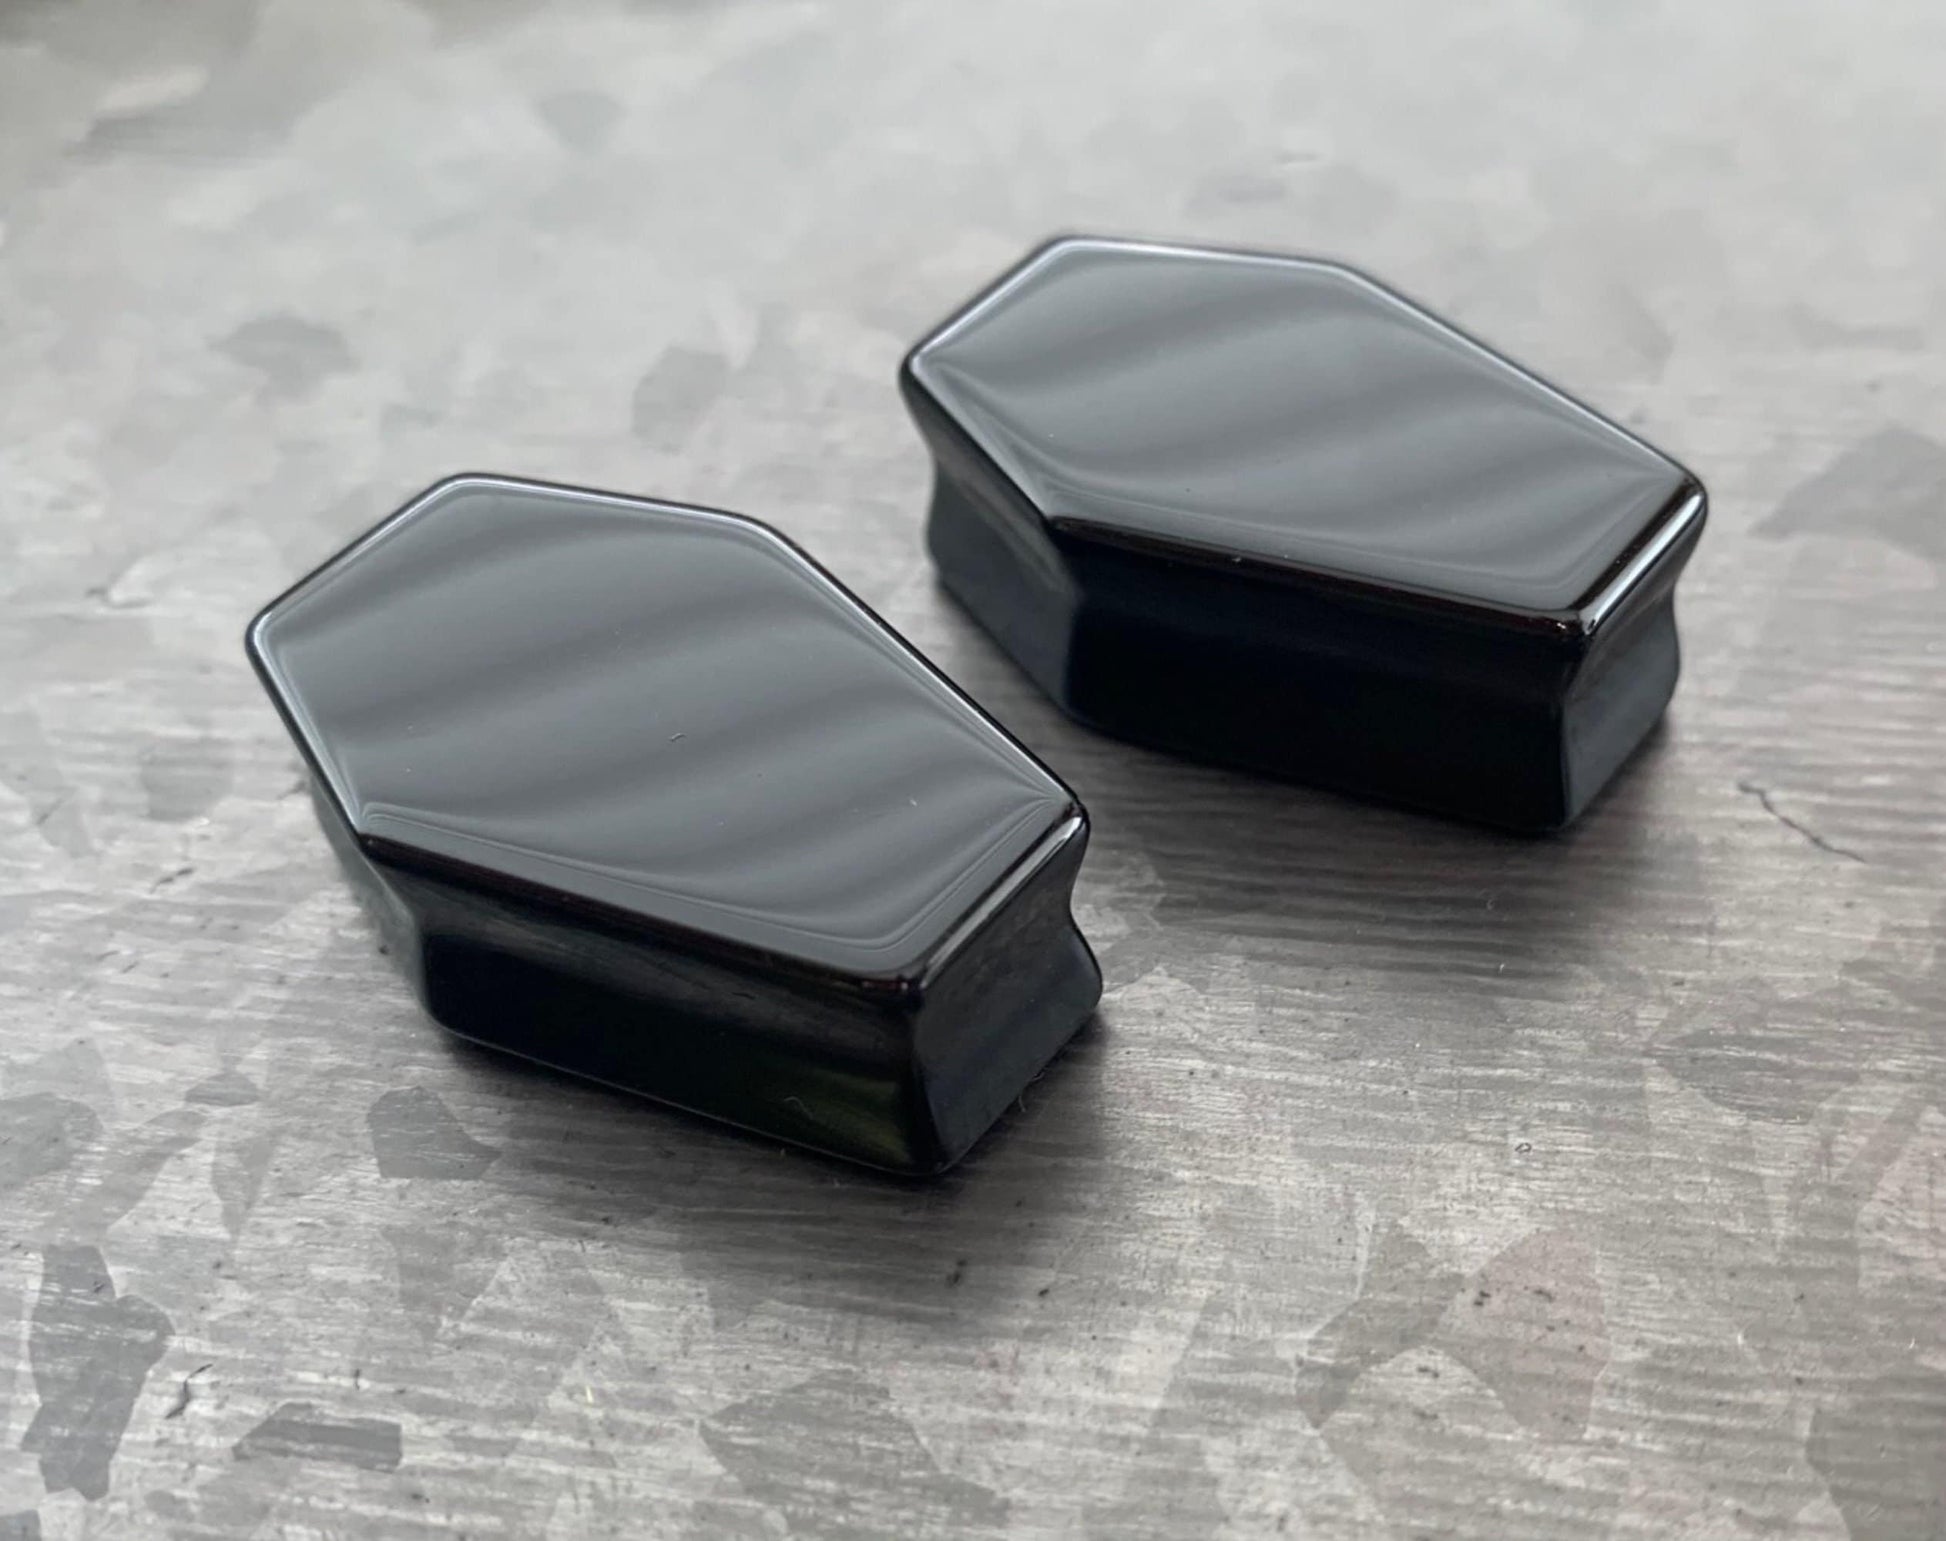 PAIR of Unique Coffin Shaped Organic Black Obsidian Double Flare Stone Plugs - Gauges 2g (6mm) to 1" (25mm) available!